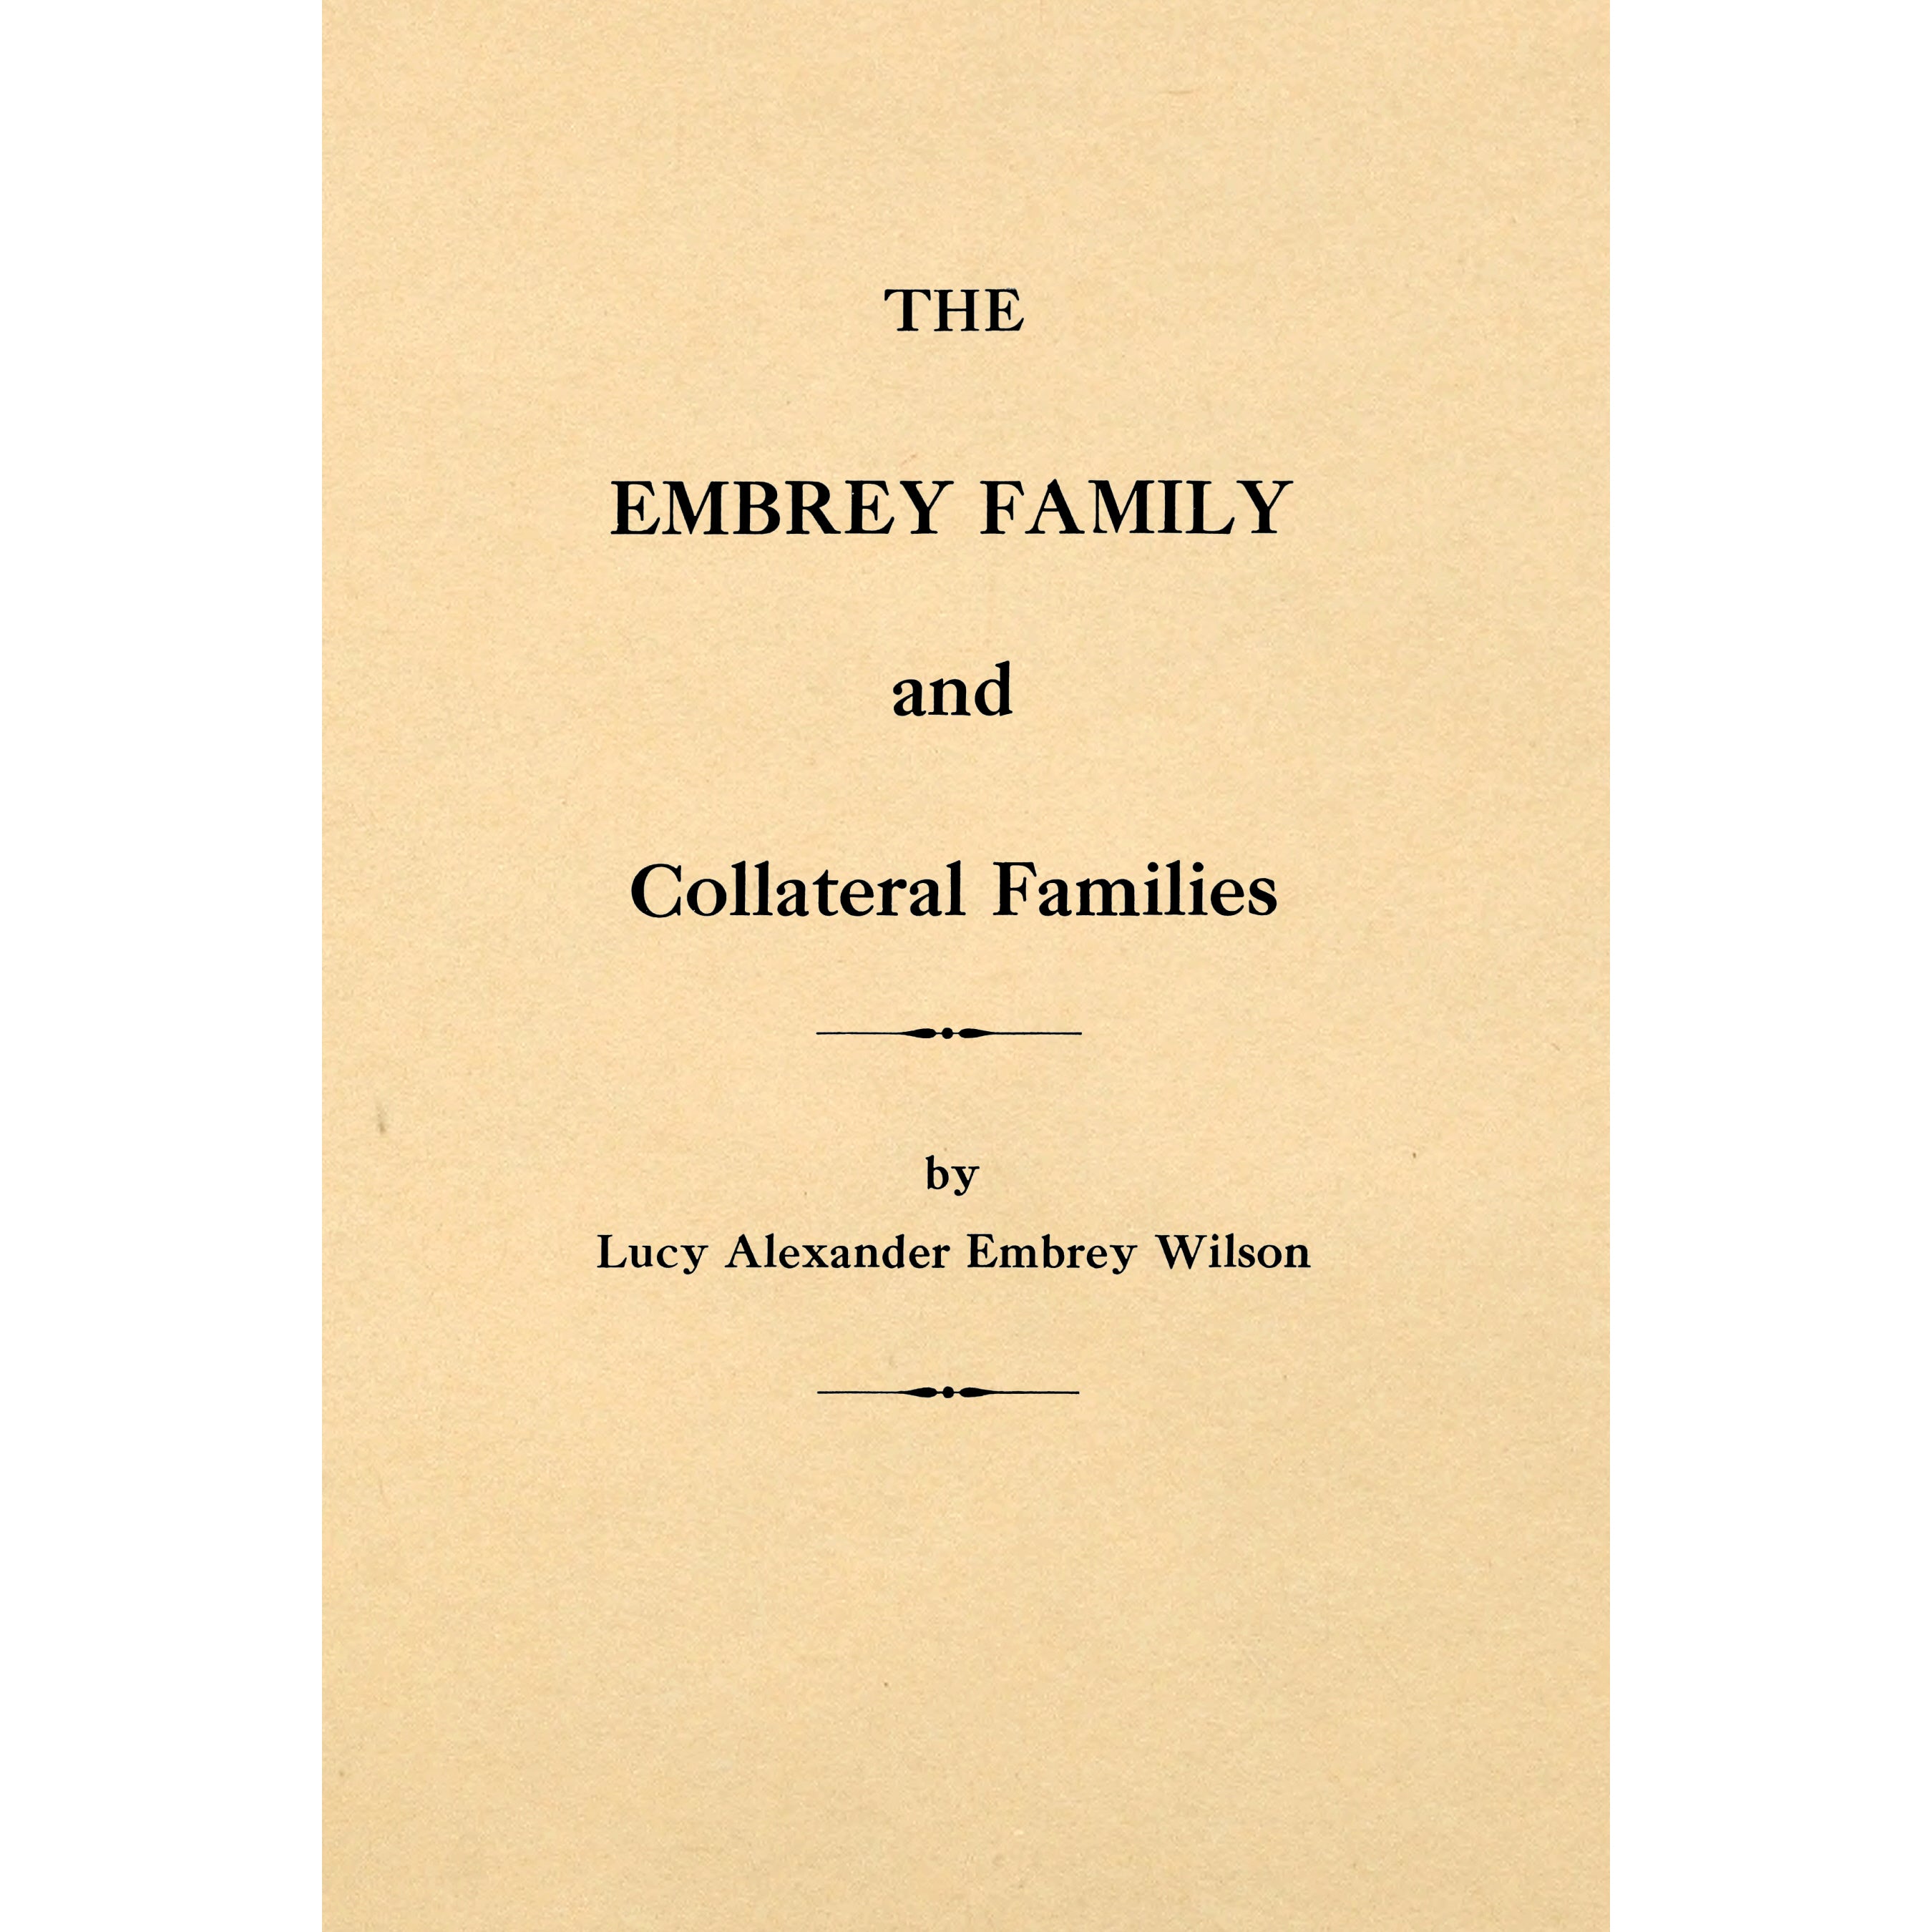 The Embrey family and collateral families